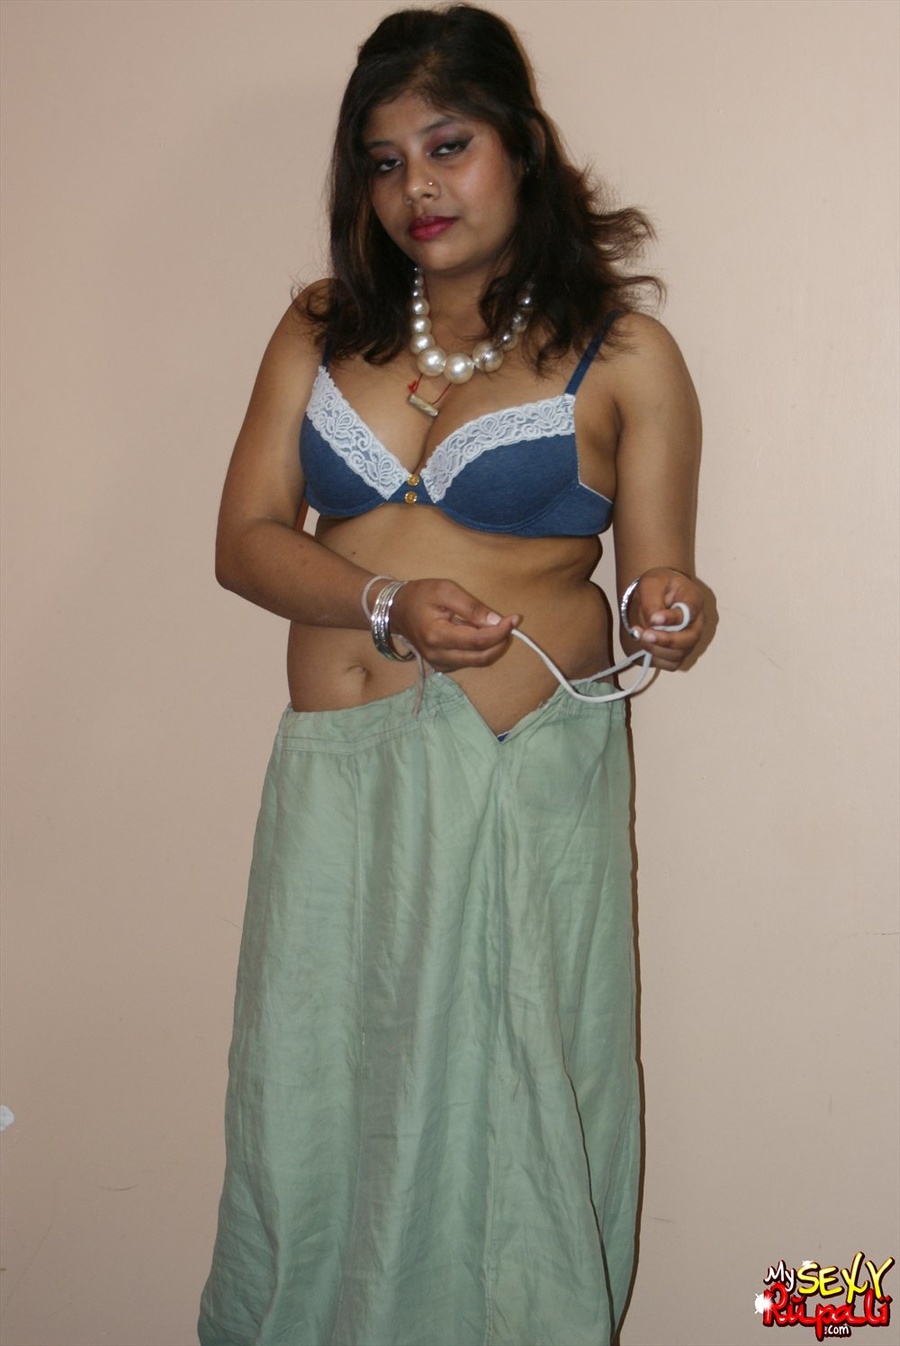 Cool pics with a real Indian girl in a blue sari undresses to expose her chubby delights on cam - XXXonXXX - Pic 6